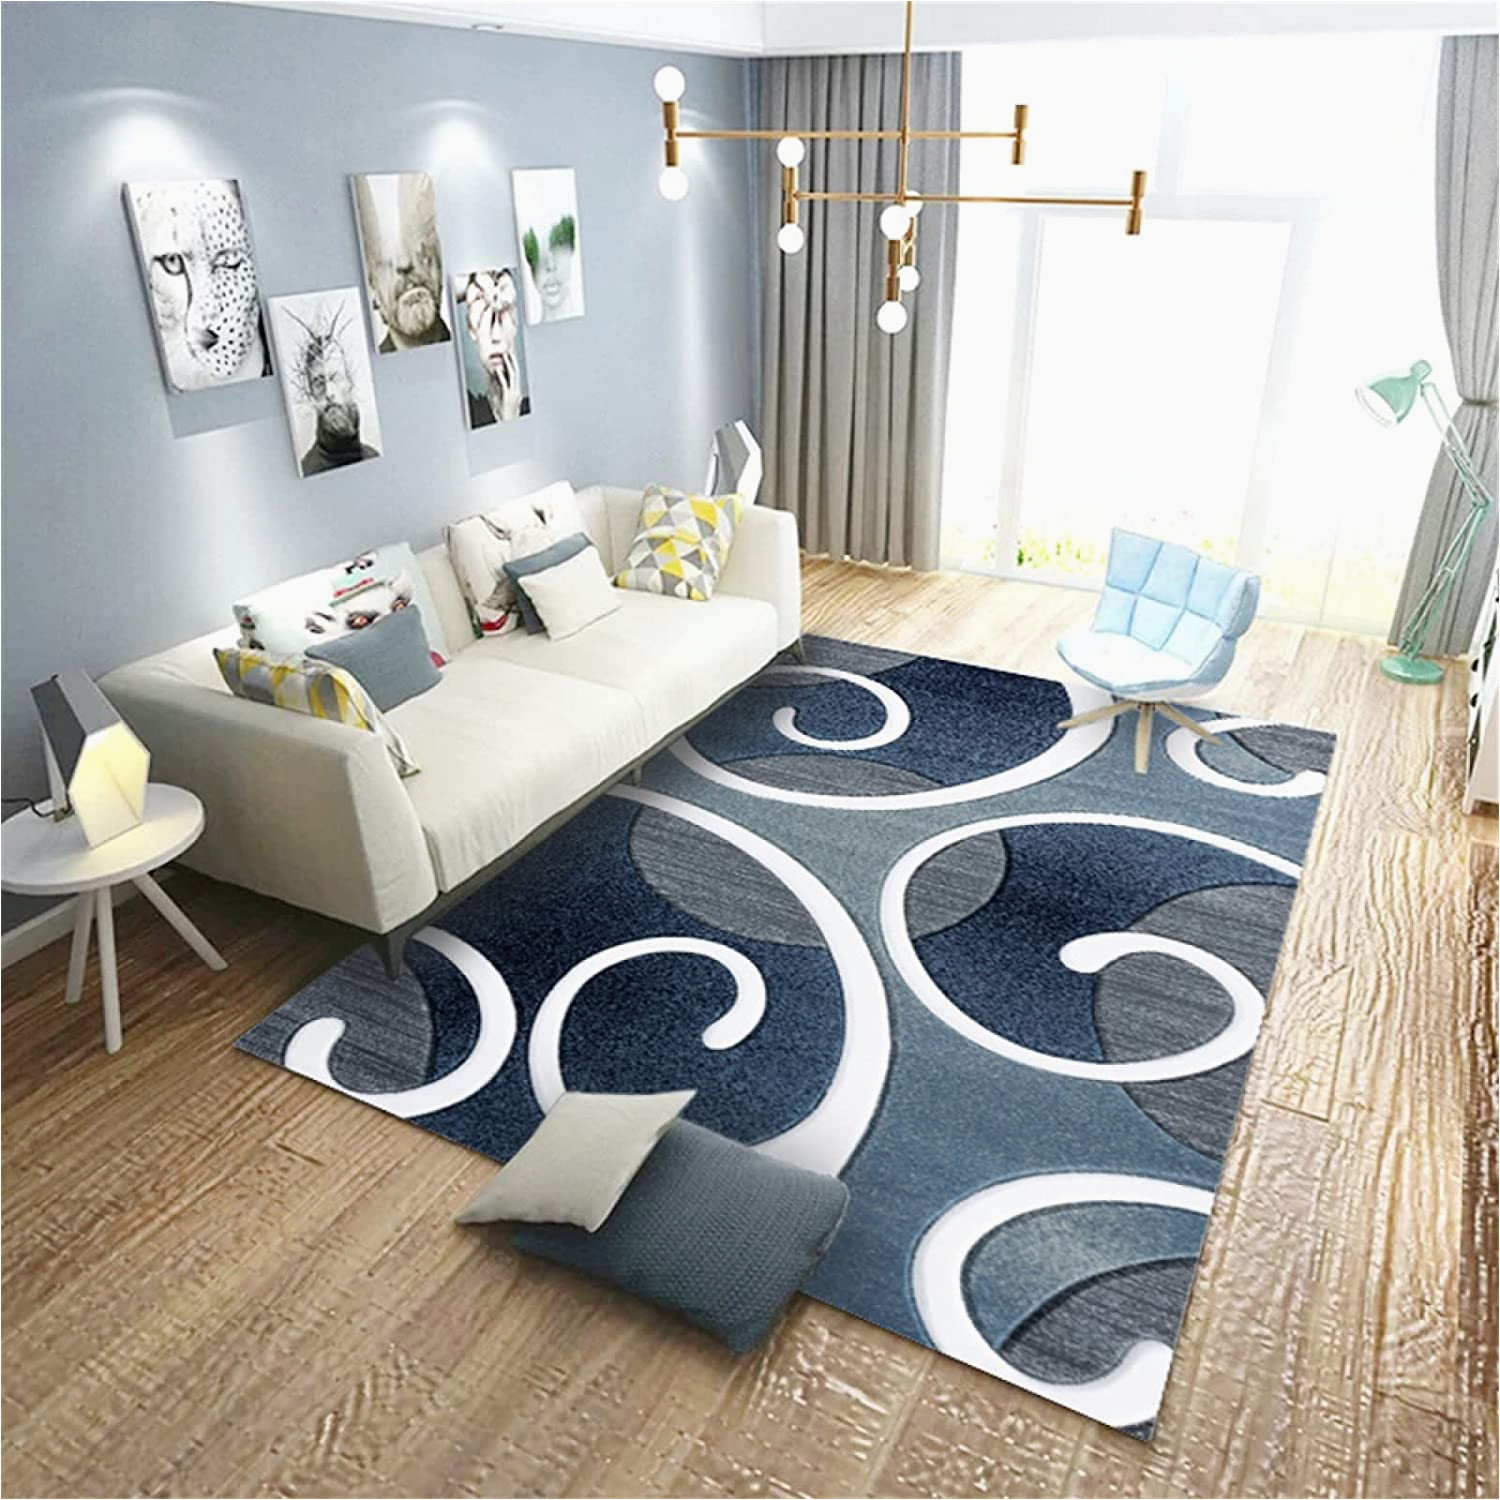 Home Goods Outdoor area Rugs Washable Rugs In Washing Machine Outdoor Rug Bedroom Short Pile Rug Blue Modern Home Decor Rugs for Living Room Patio Rug 50 X 80 Cm 1ft 7.7 X 2ft 7.5 …